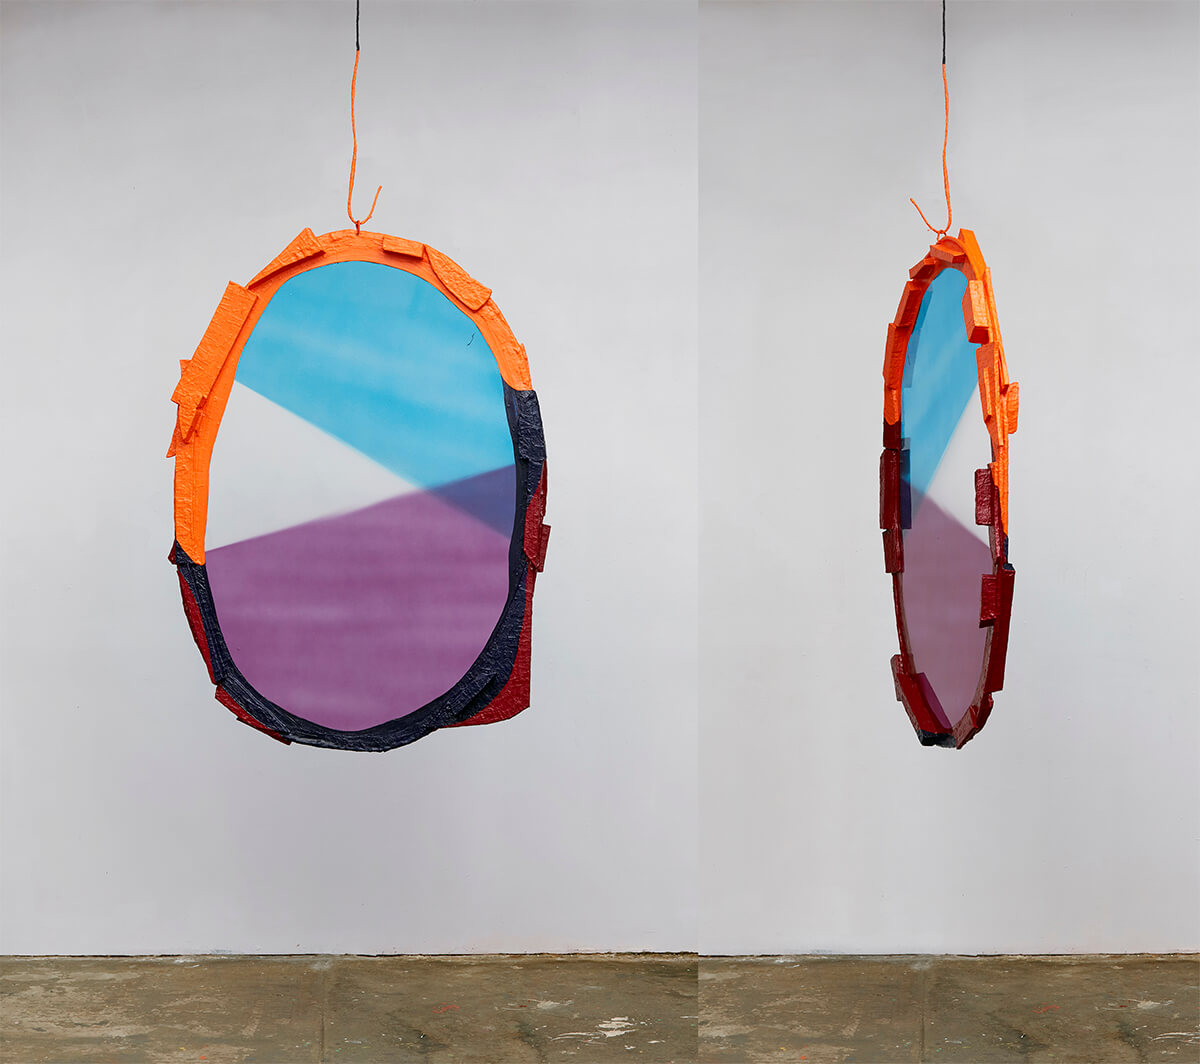 Fabienne Lasserre, Oh.Ah., 2021. Linen, steel, transparent vinyl, corrugated plastic, extruded polystyrene foam, acrylic polymer, acrylic and enamel paint. 61 x 45 x 4.5 in. Photo courtesy of Alan Wiener, Polite Photographic Services.